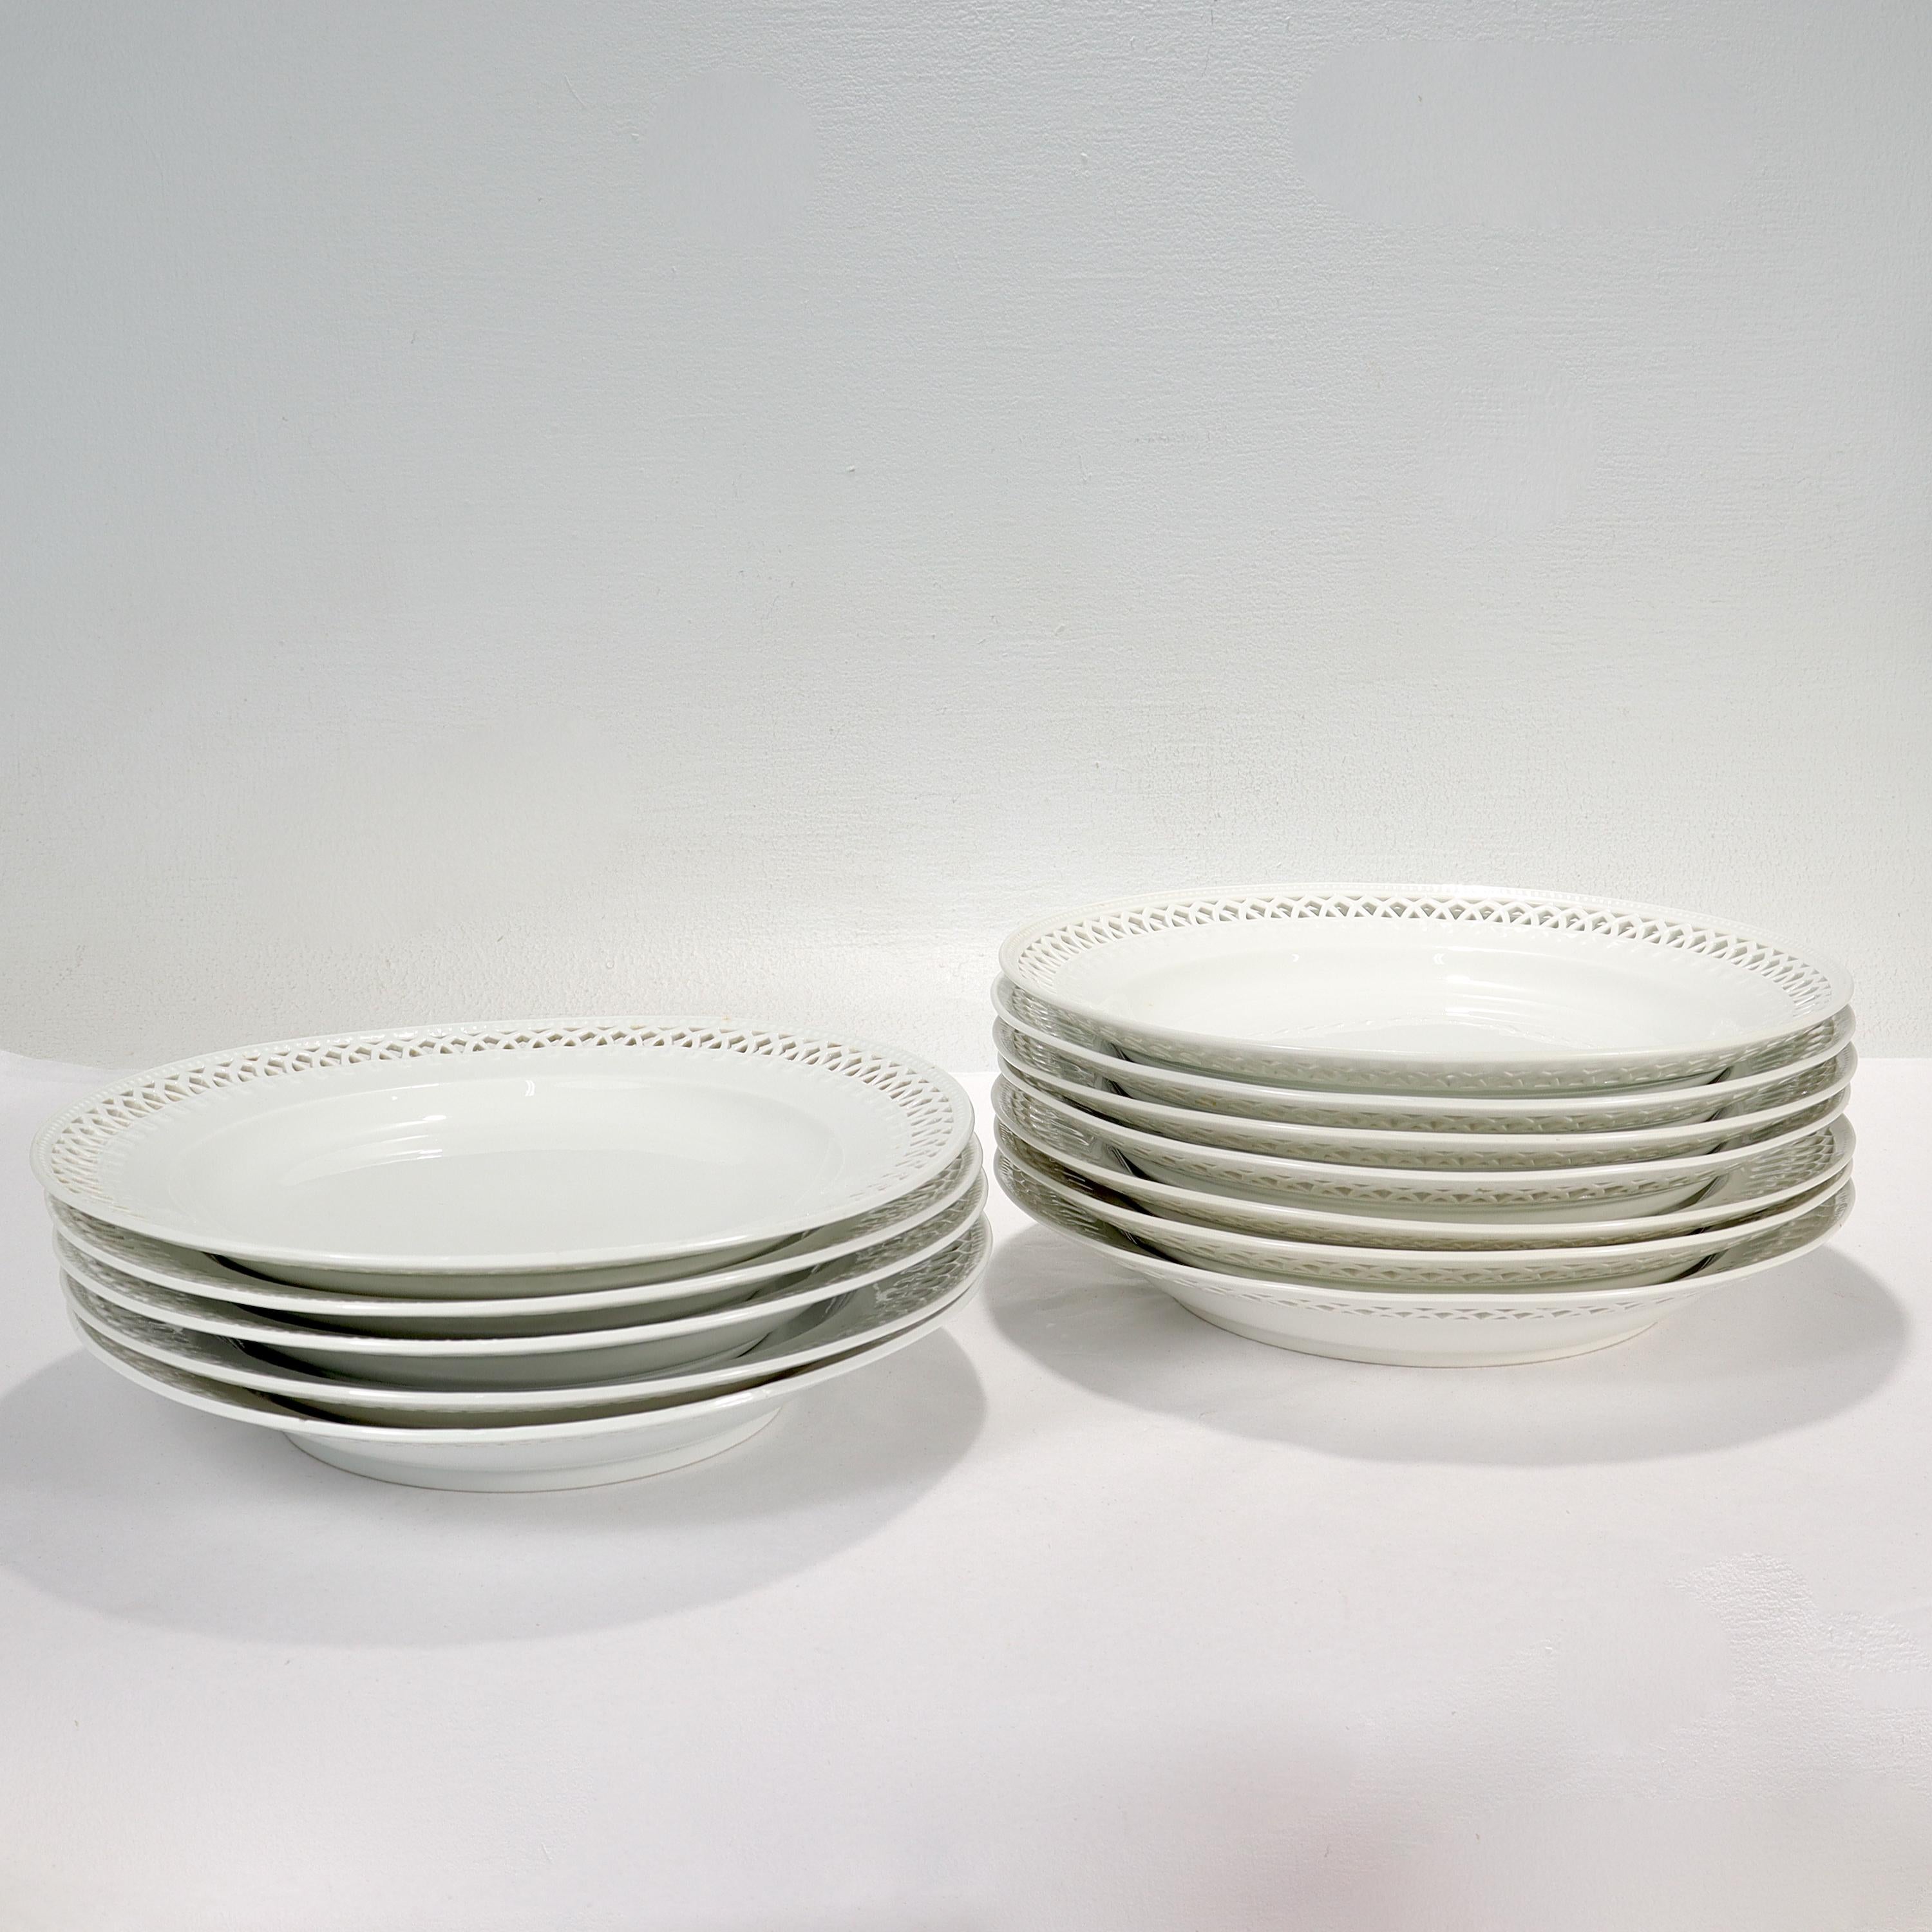 A fine assembled set of 12 reticulated blanc de chine porcelain plates.

By KPM Royal Berlin.

The plates are undecorated (or blanc de chine) with reticulated Jugendstil style rim. 

The plates vary slightly in size and a few are slightly out